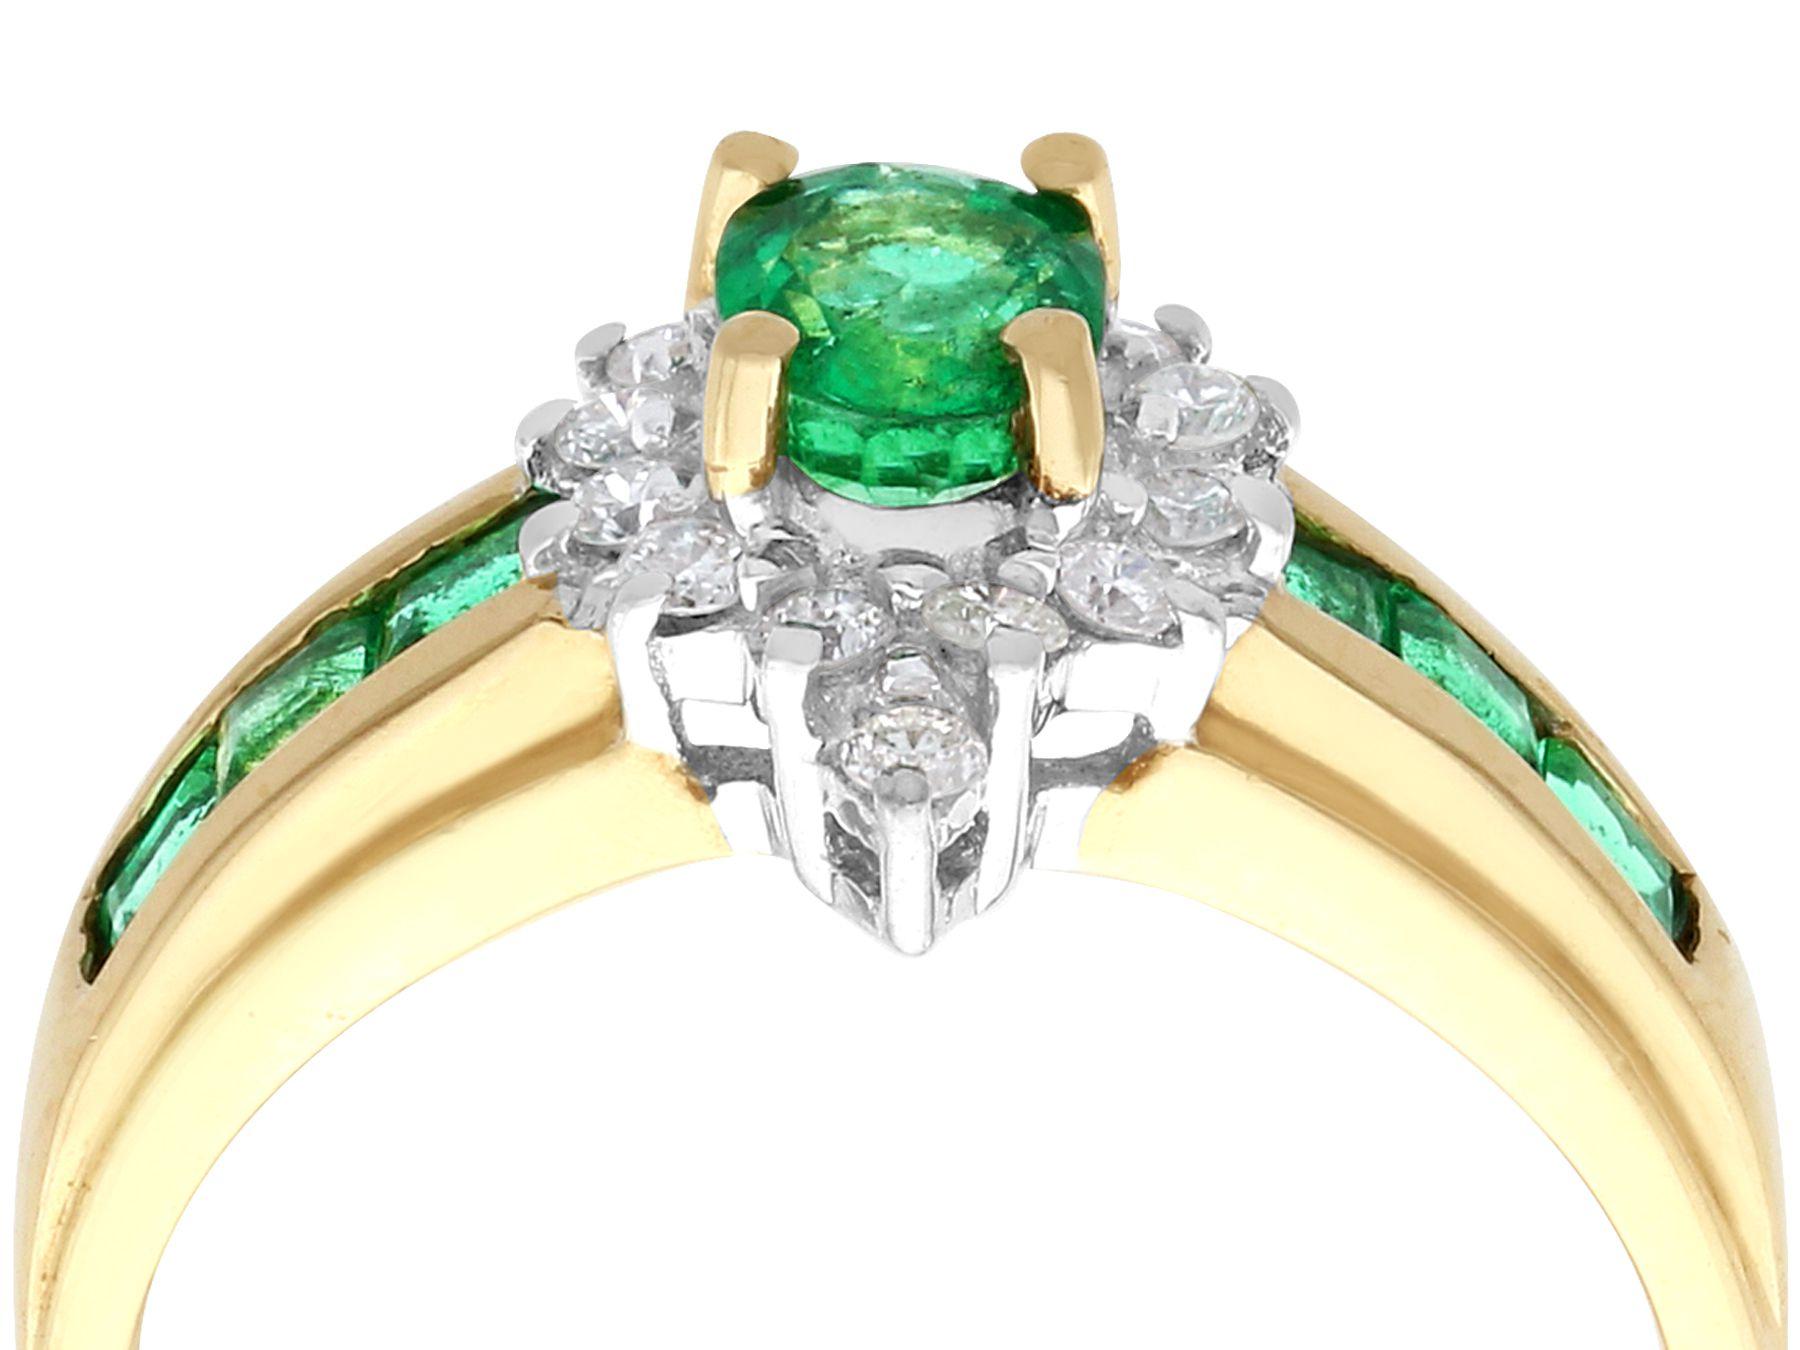 A fine and impressive 0.62 carat emerald and 0.14 carat diamond, 14 karat yellow gold and 14 karat white gold set cocktail ring; part of our diverse jewelry and estate jewelry collections.

This fine and impressive oval cut emerald and diamond dress